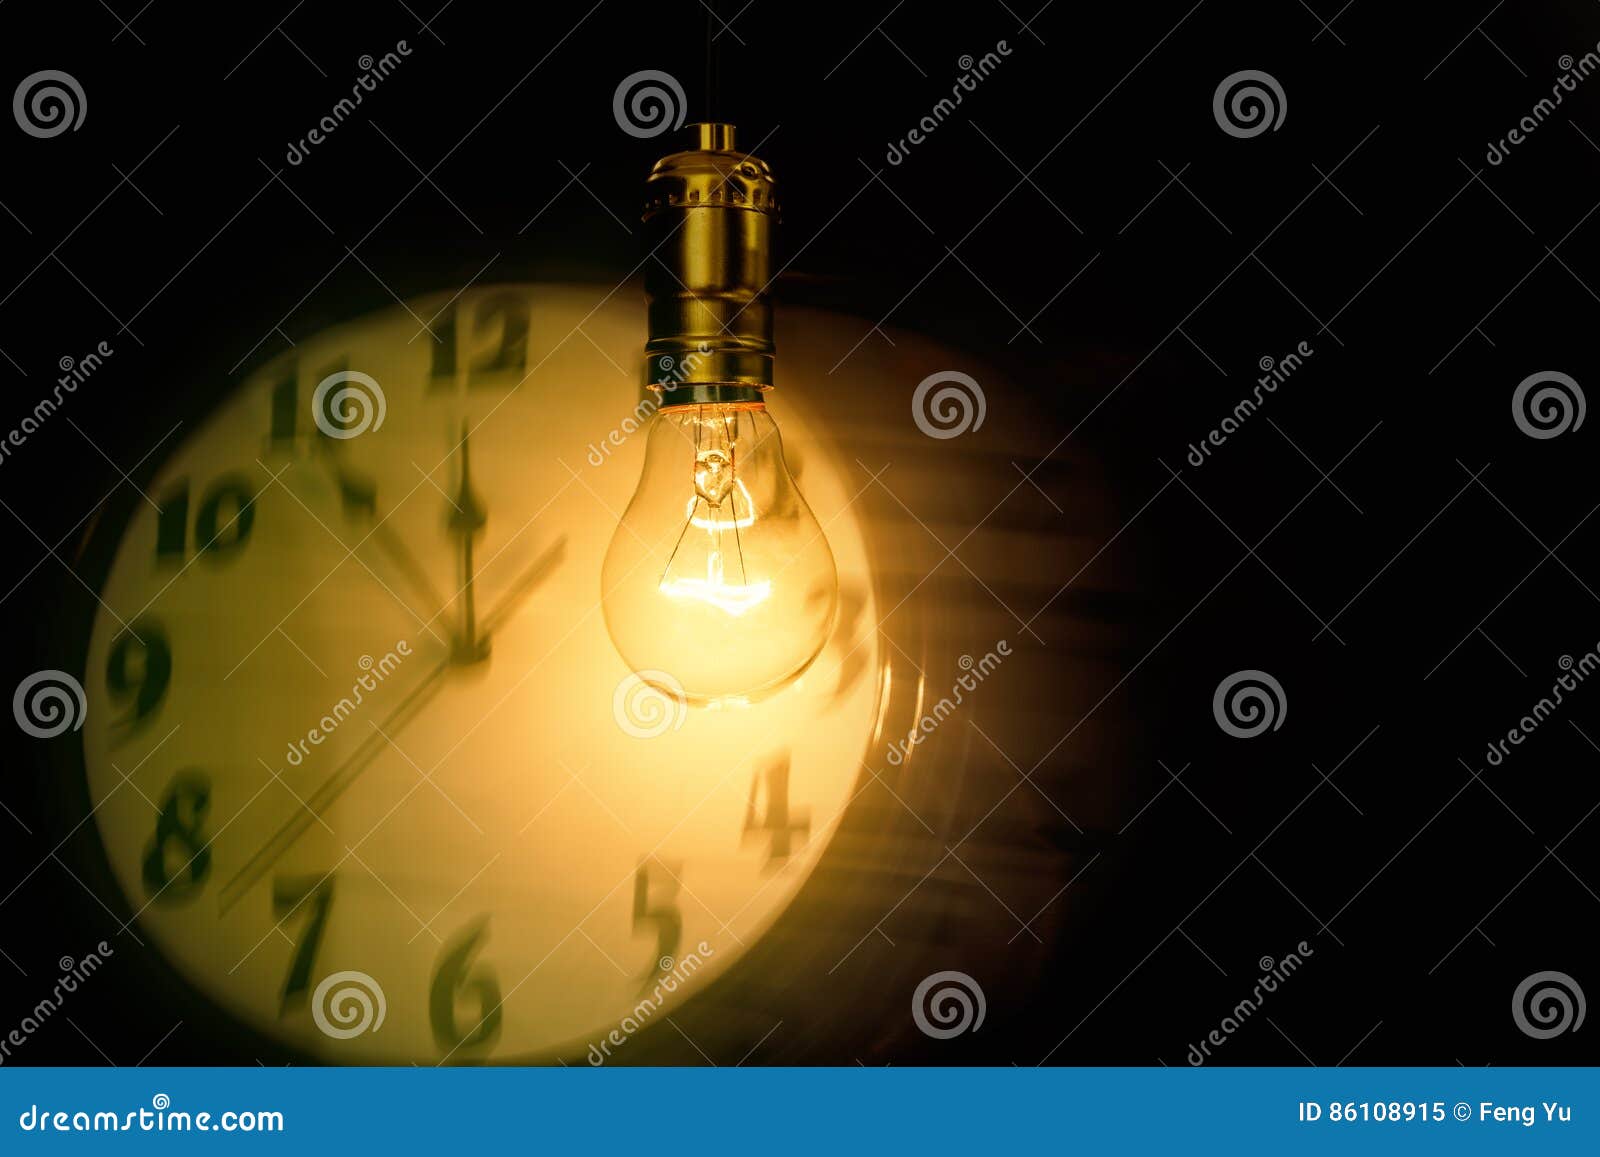 Light bulb and clock stock image. Image of bright, clock - 86108915